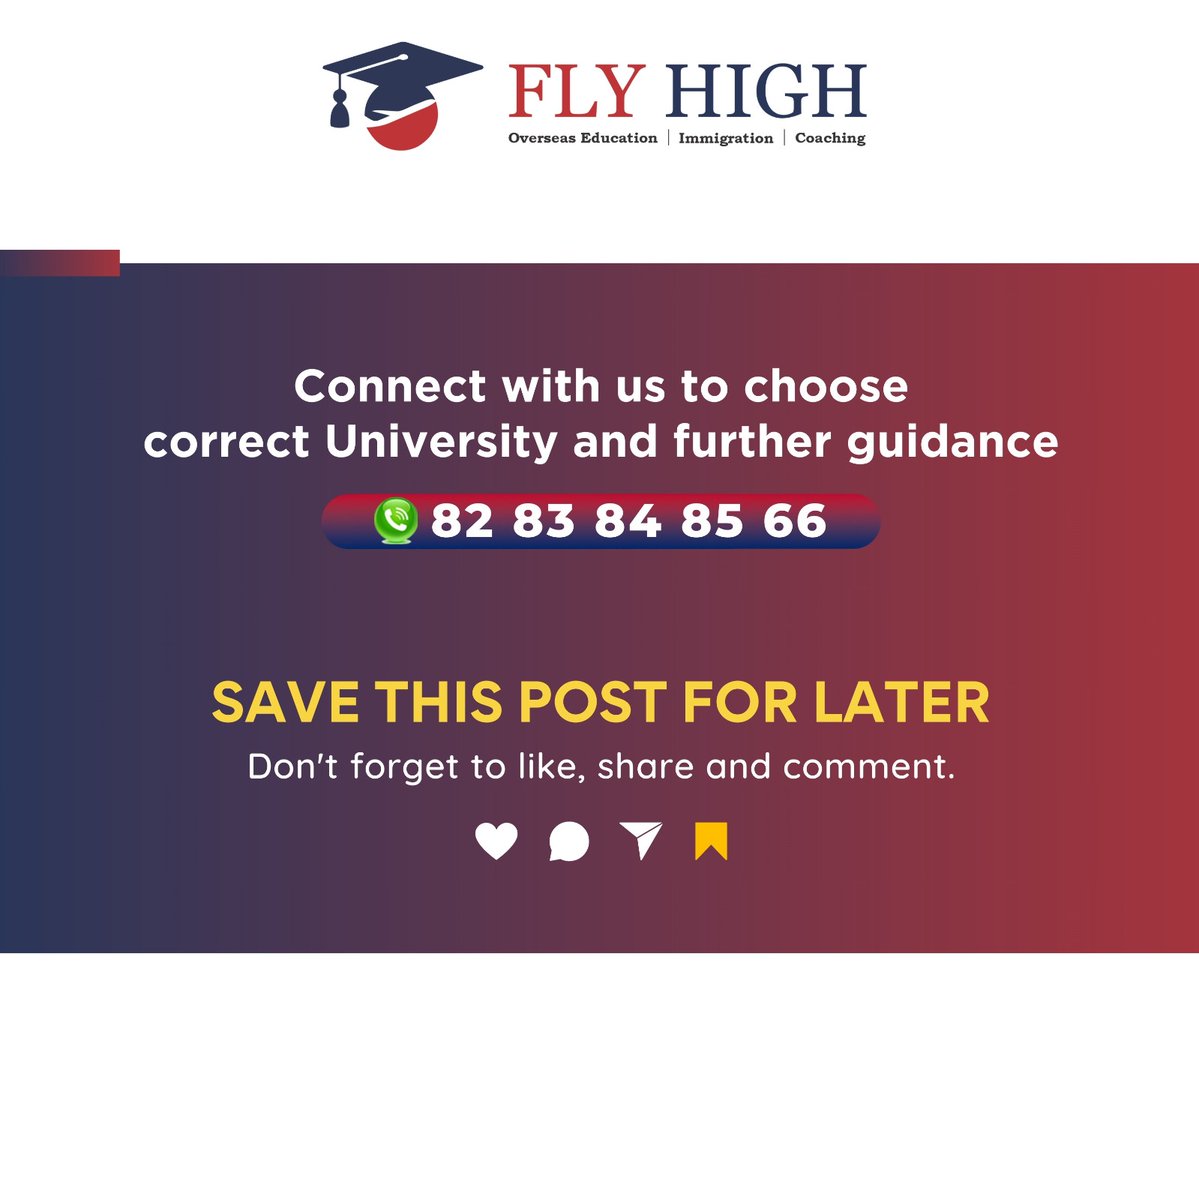 Embarking on your journey towards #overseaseducation is exciting, but choosing the right consultancy is very crucial.
With #flyhighconsultants, you will find a dedicated team committed to guiding you every step of the way.
Let us turn your dream of #studyingabroad into a reality